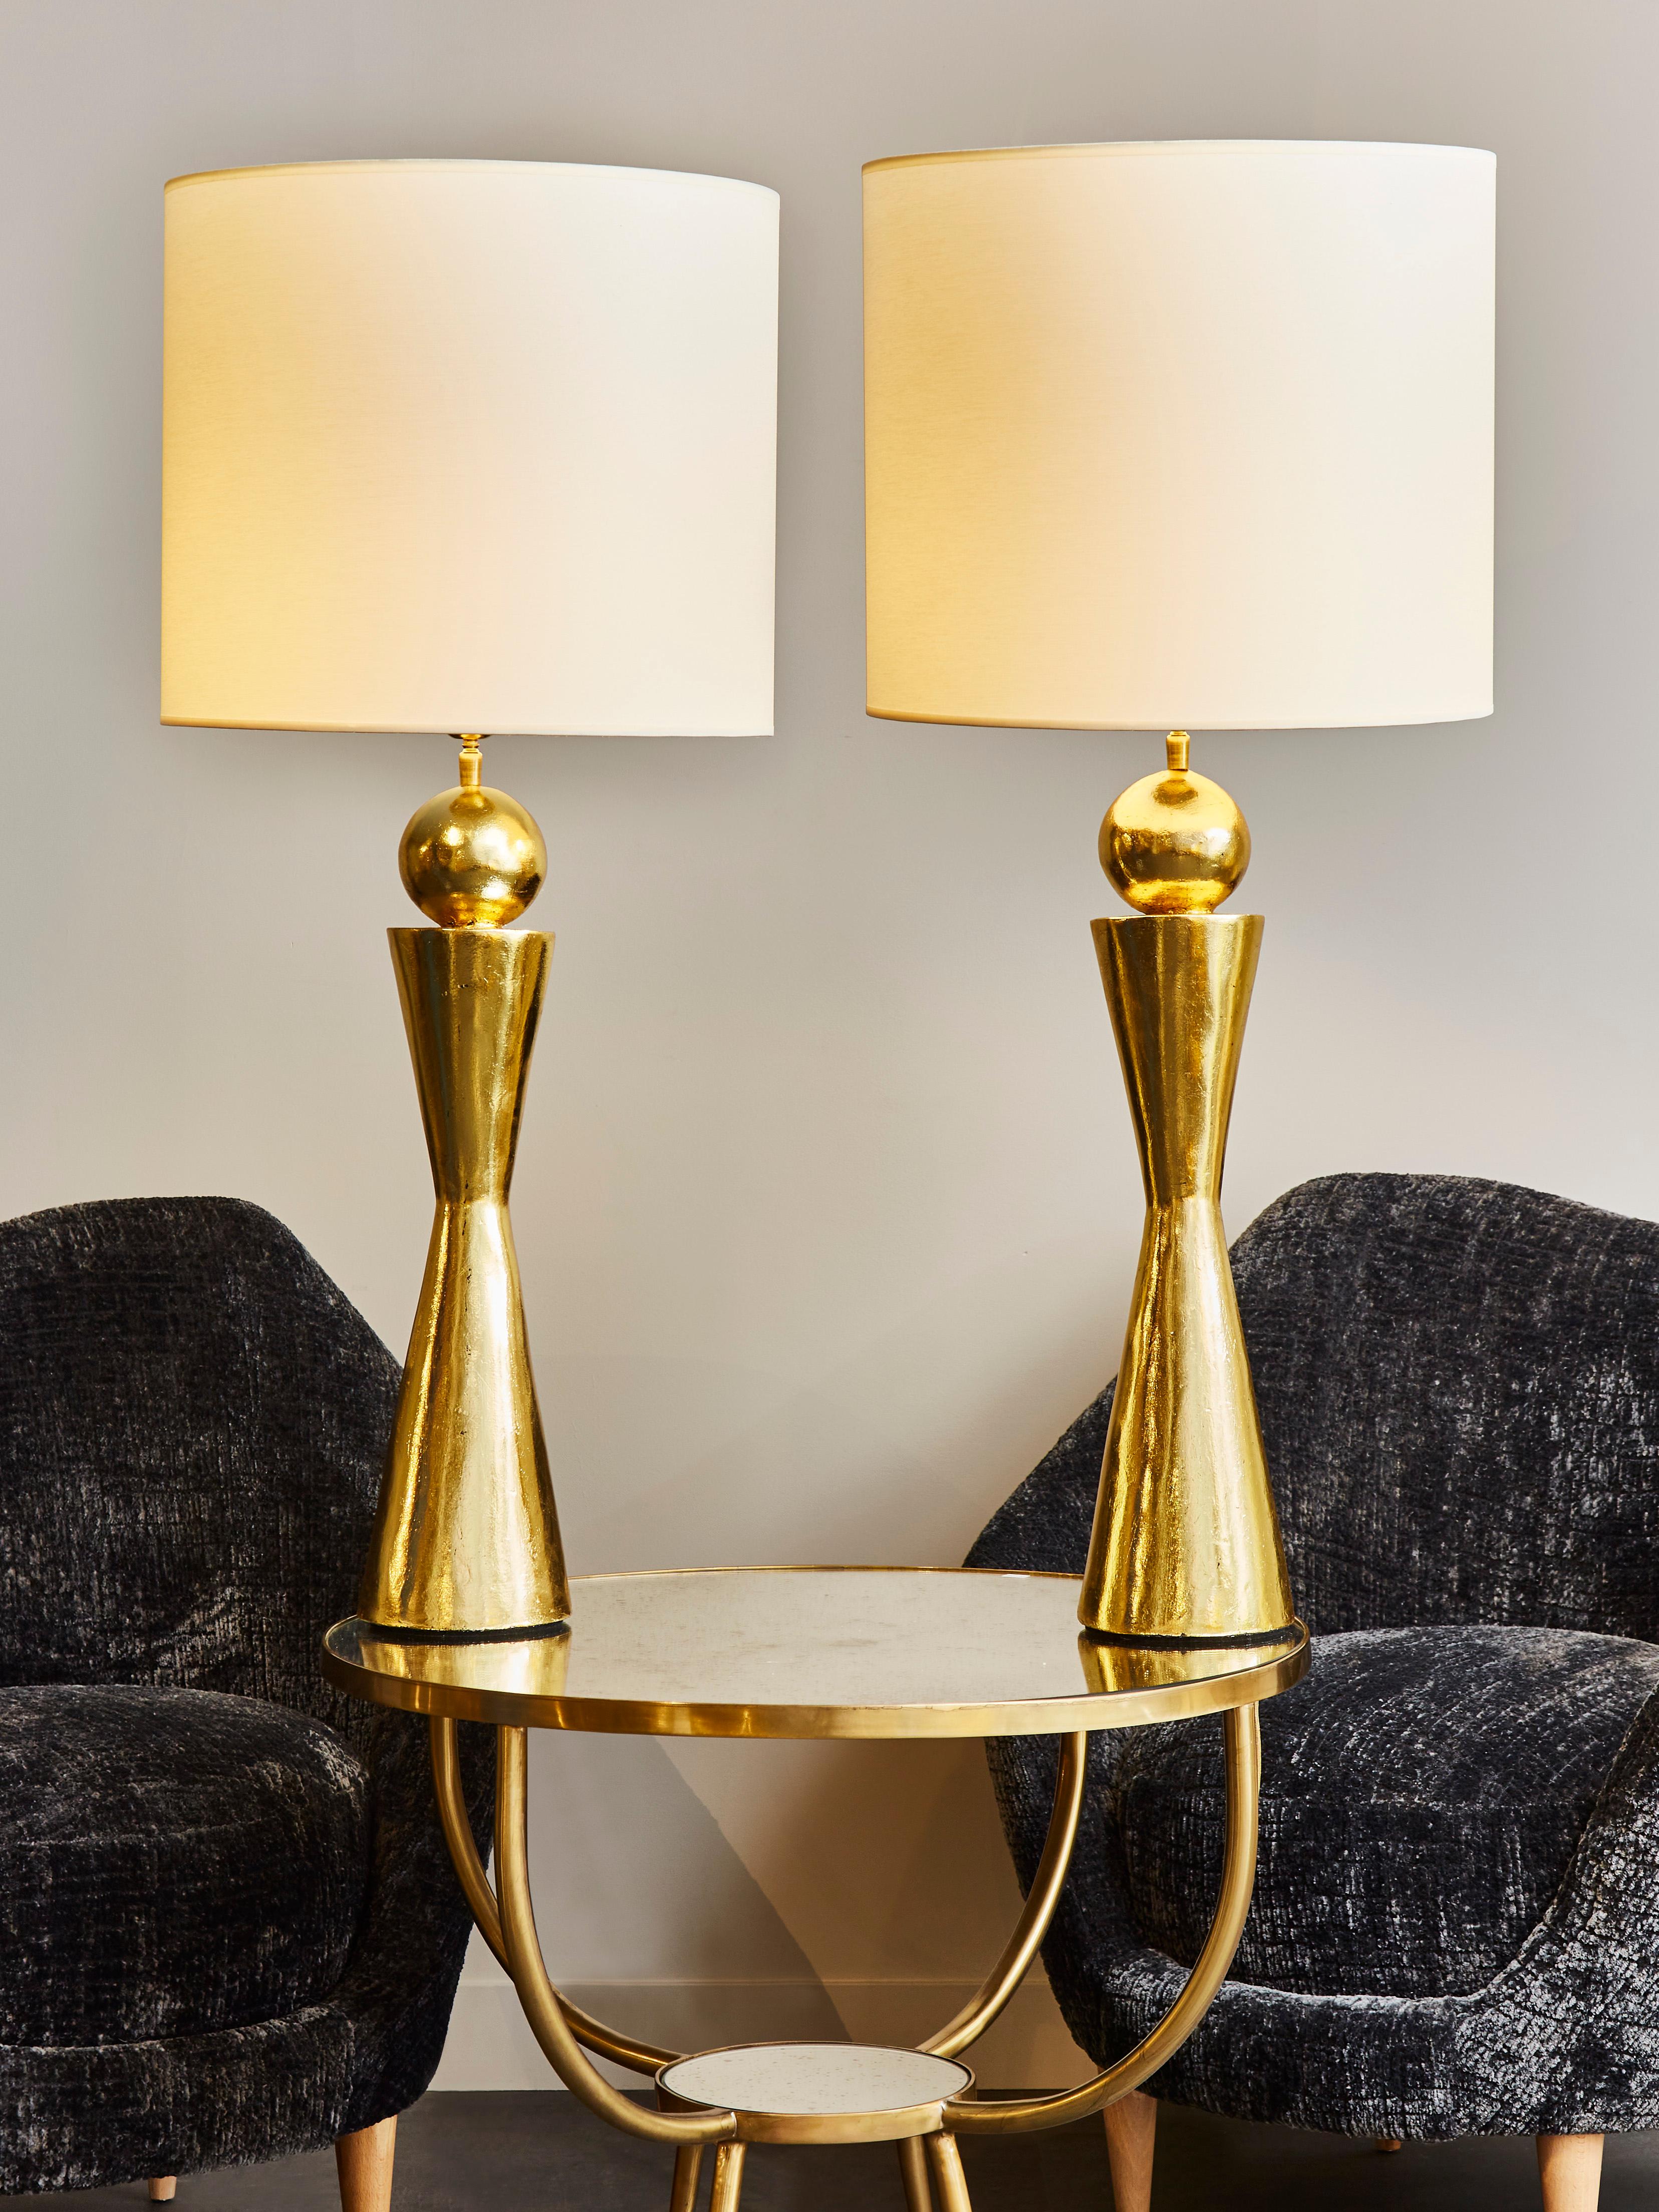 Pair of beautiful tall table lamps made of plaster covered with gold leaf.